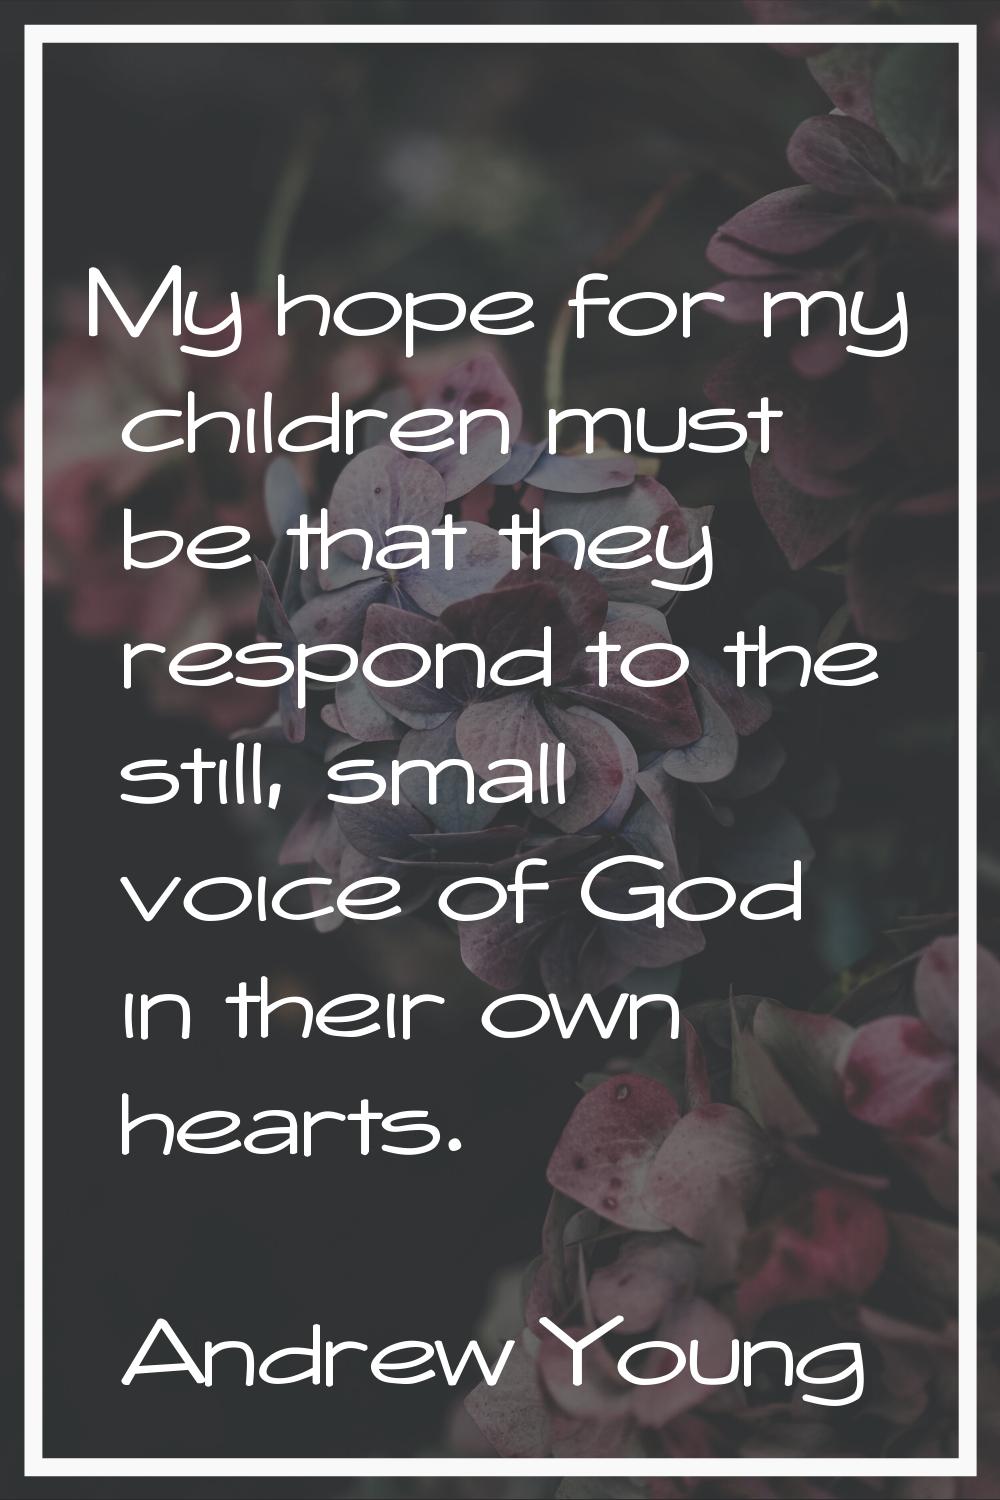 My hope for my children must be that they respond to the still, small voice of God in their own hea